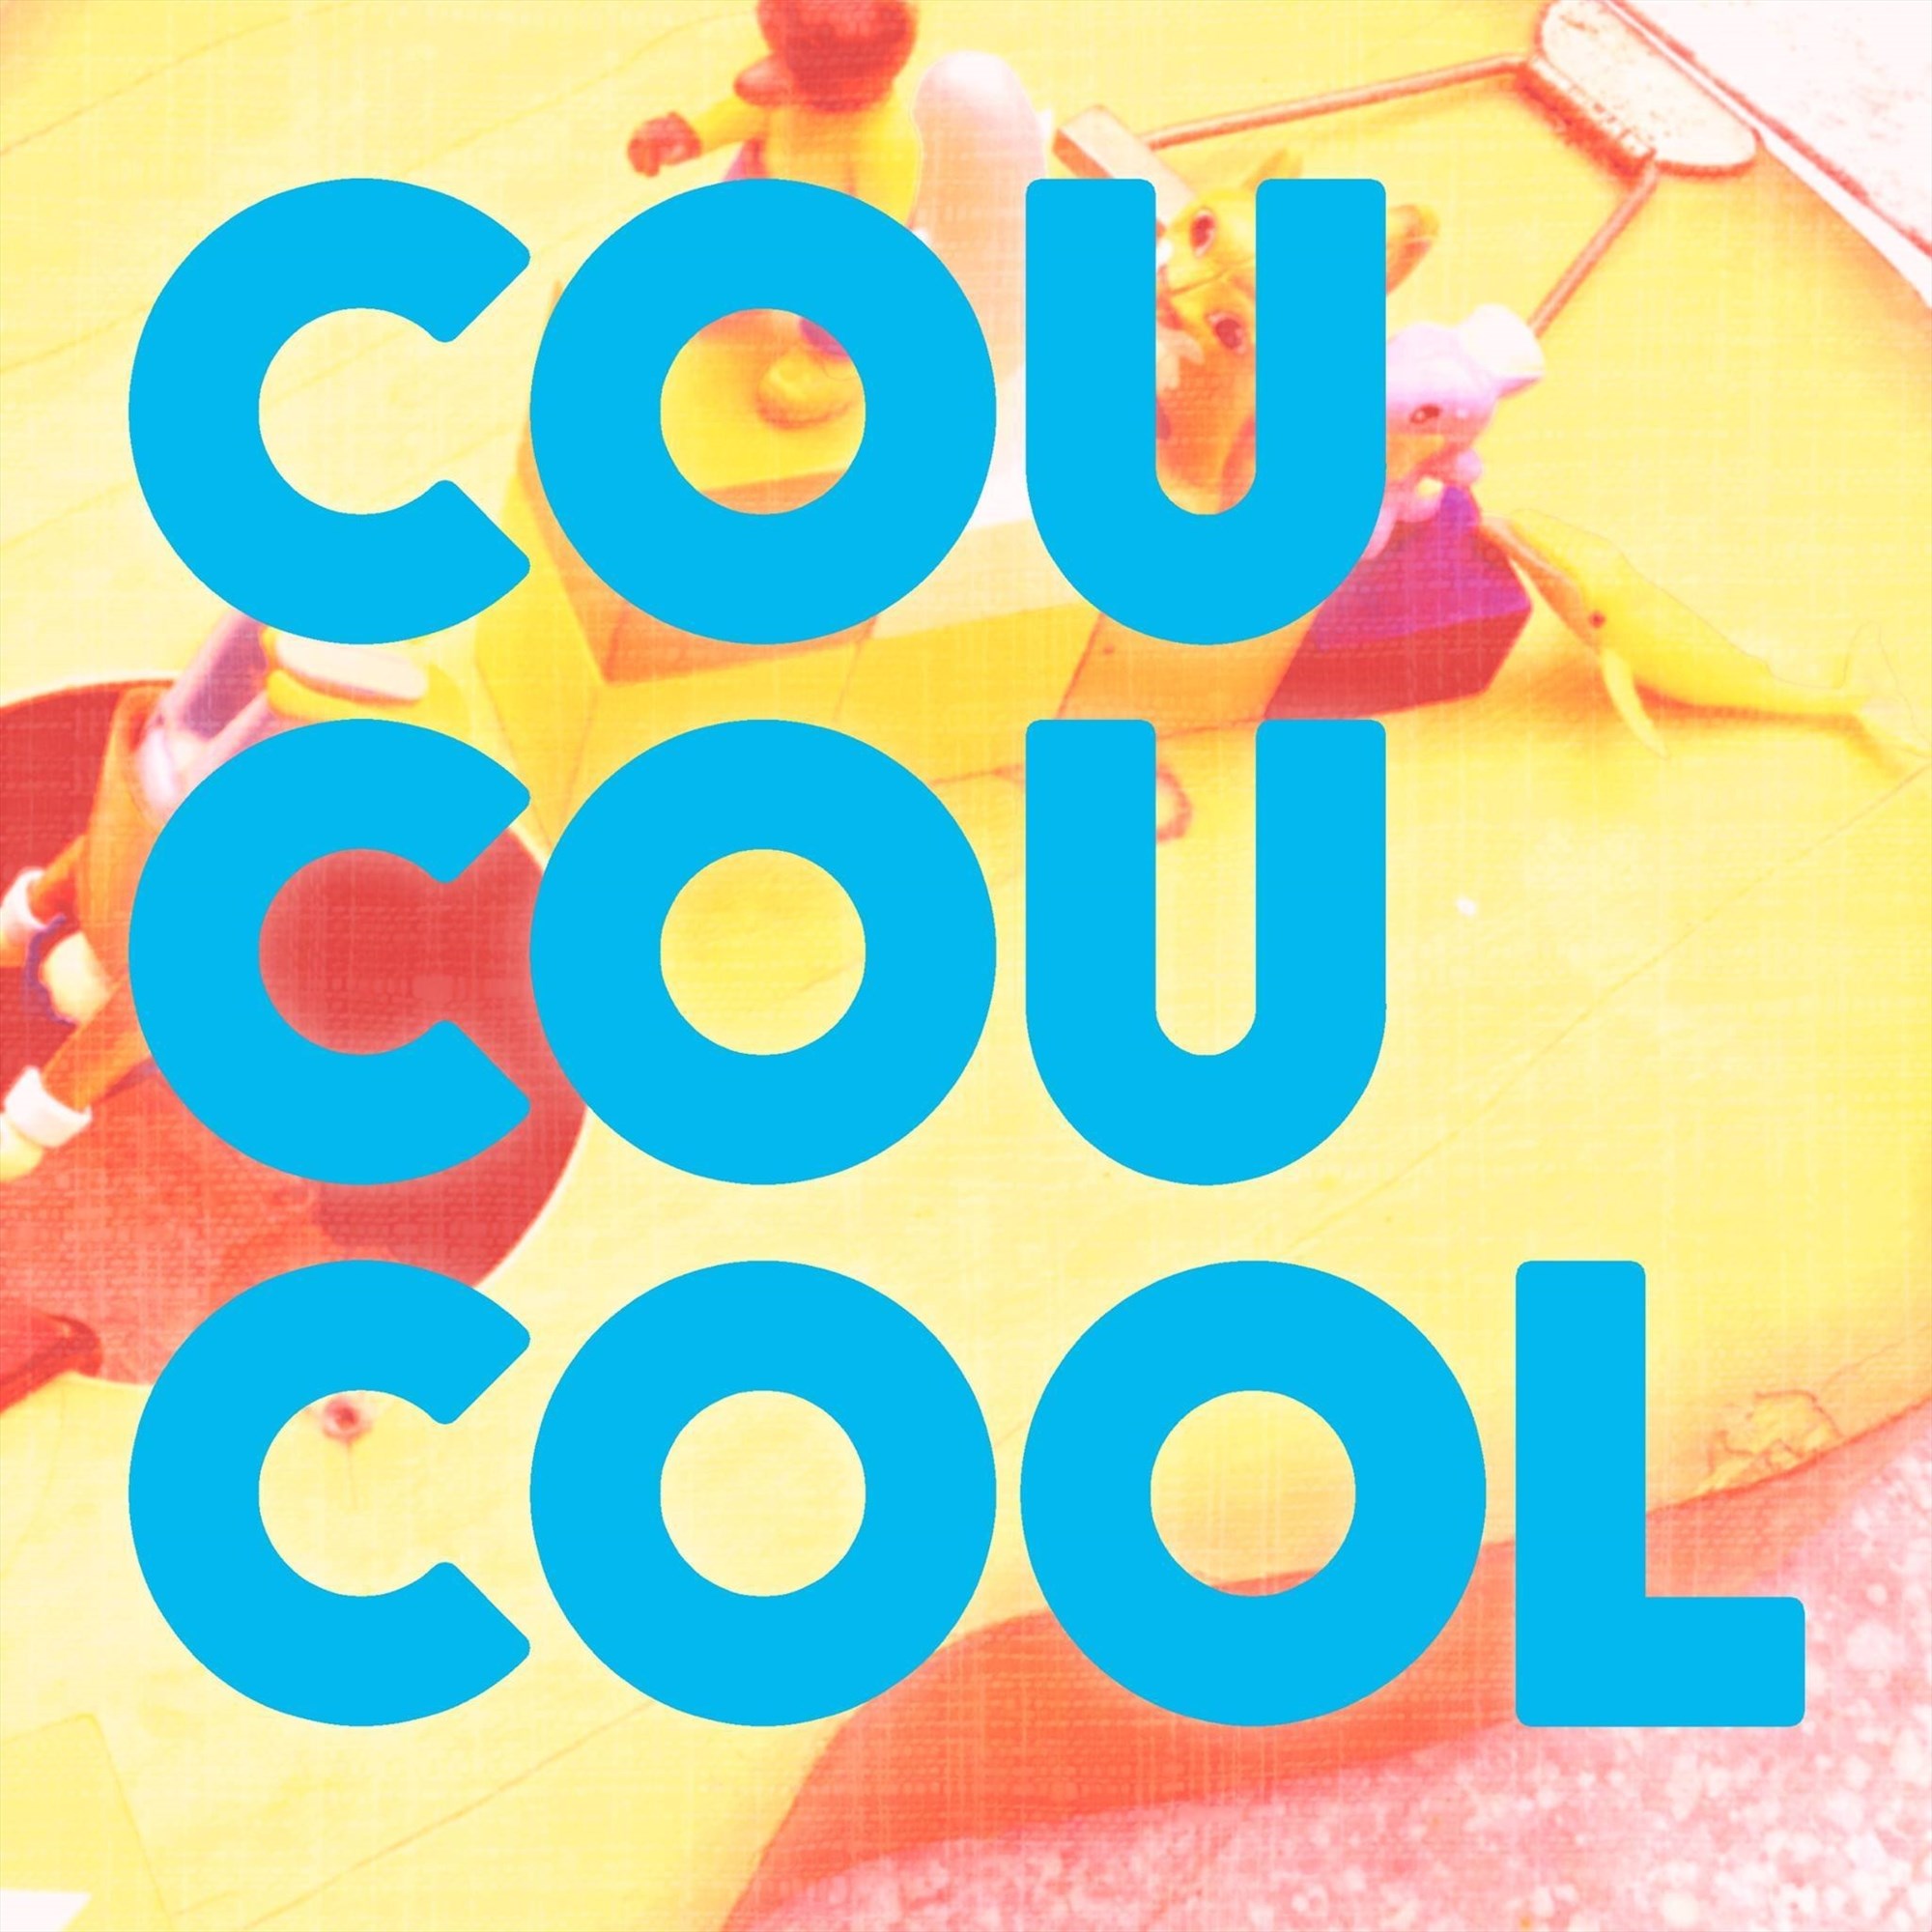 COUCOUCOOL © Coucoucool